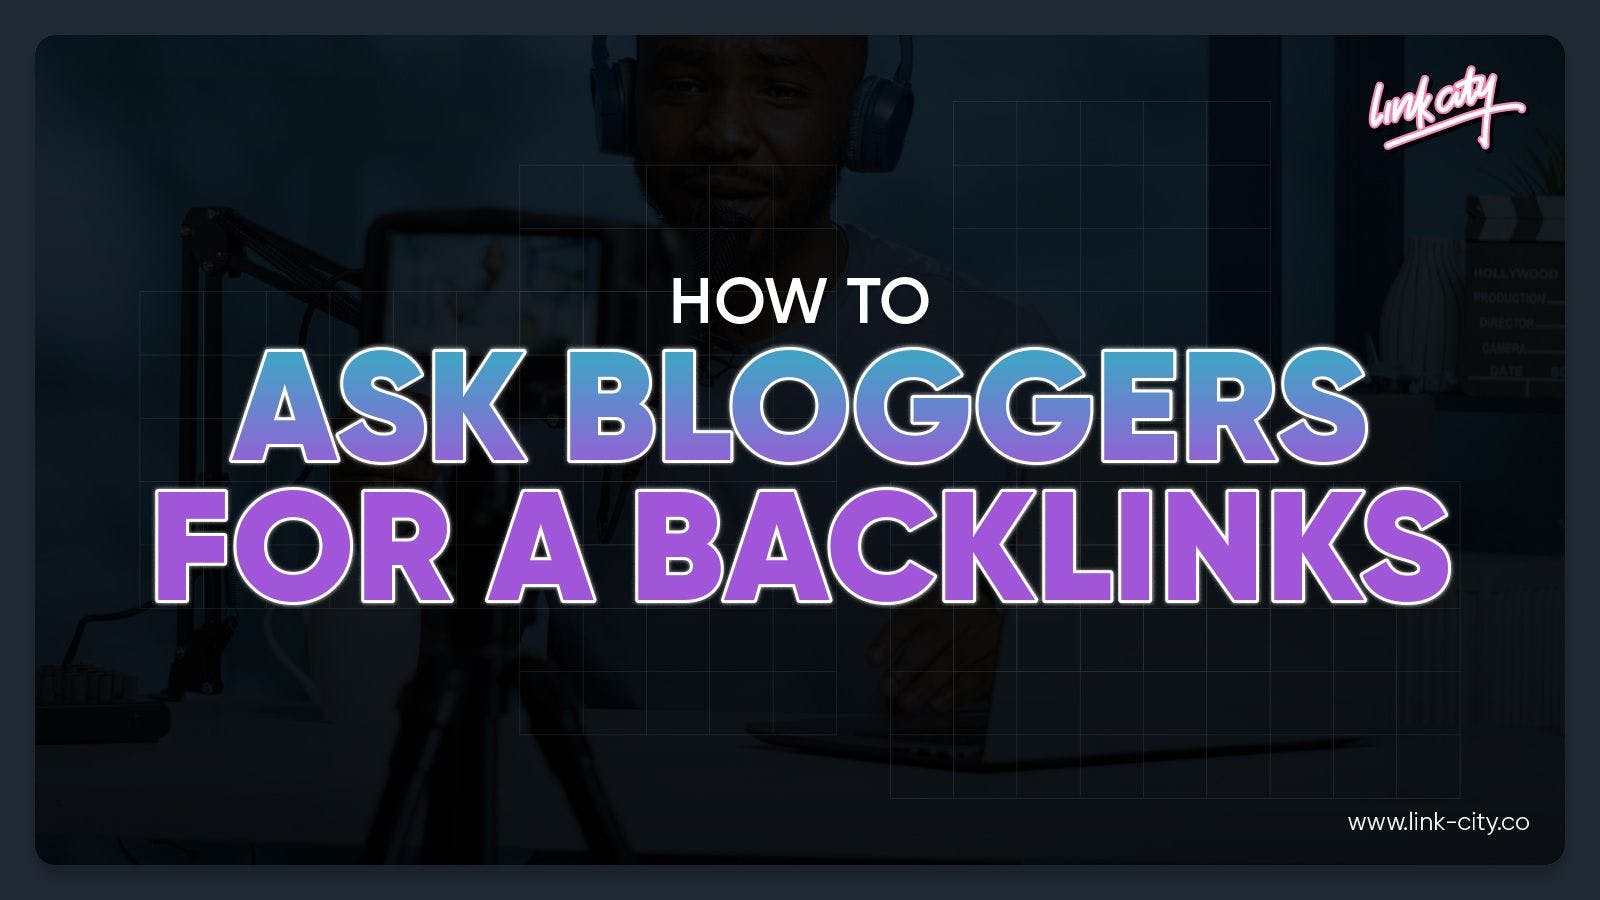 How To Ask Bloggers For A Backlink